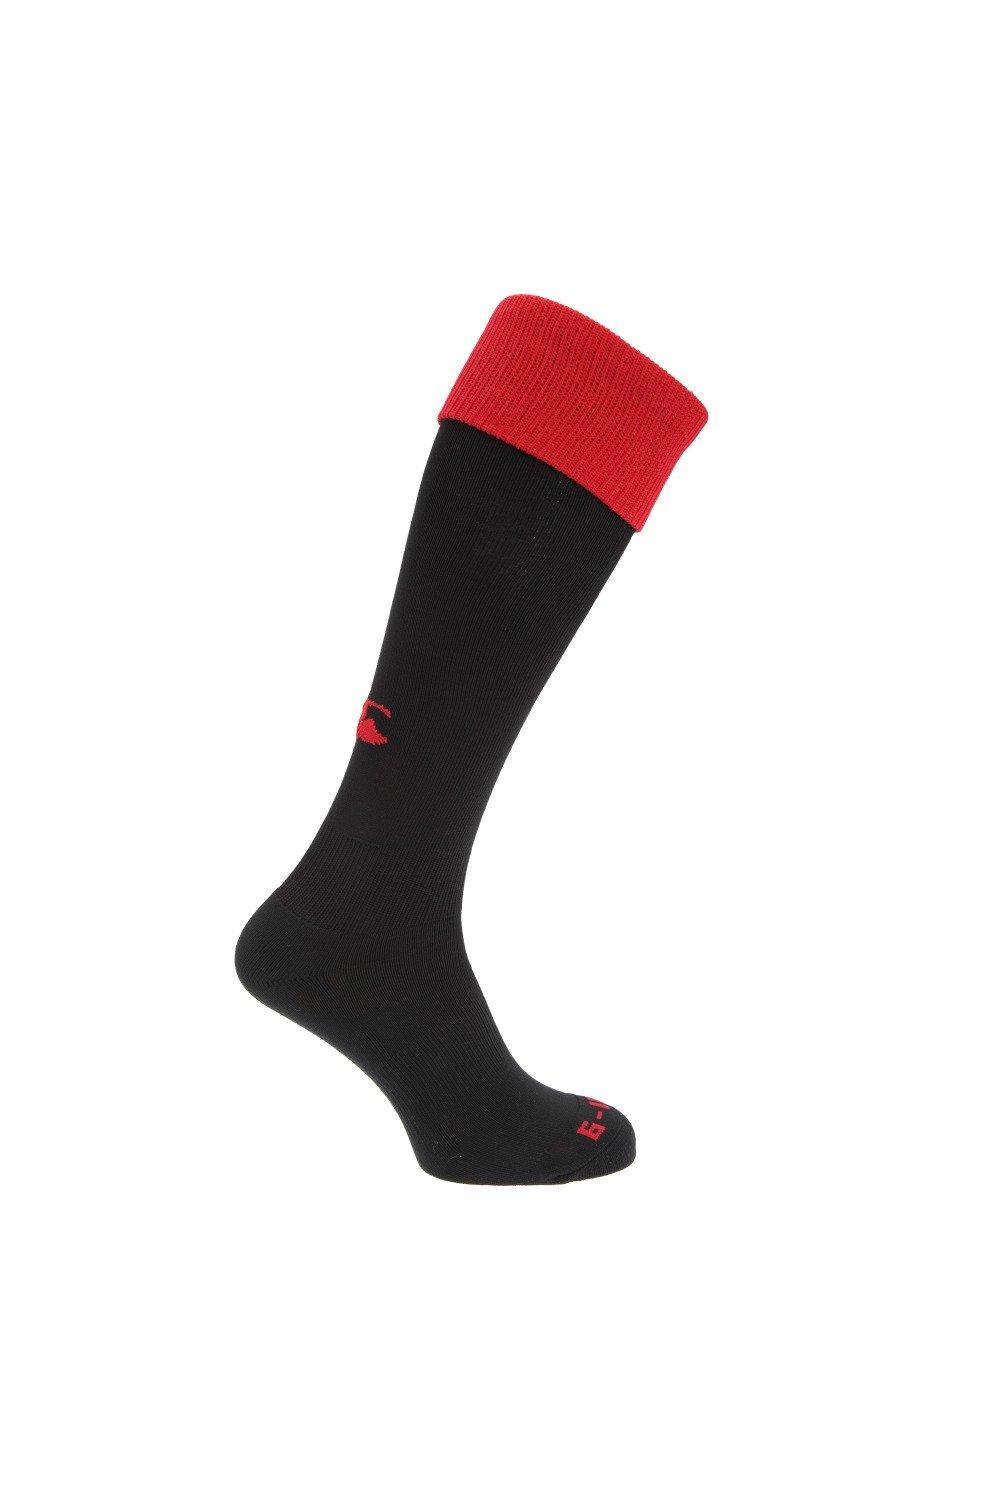 Playing Cap Rugby Sport Socks